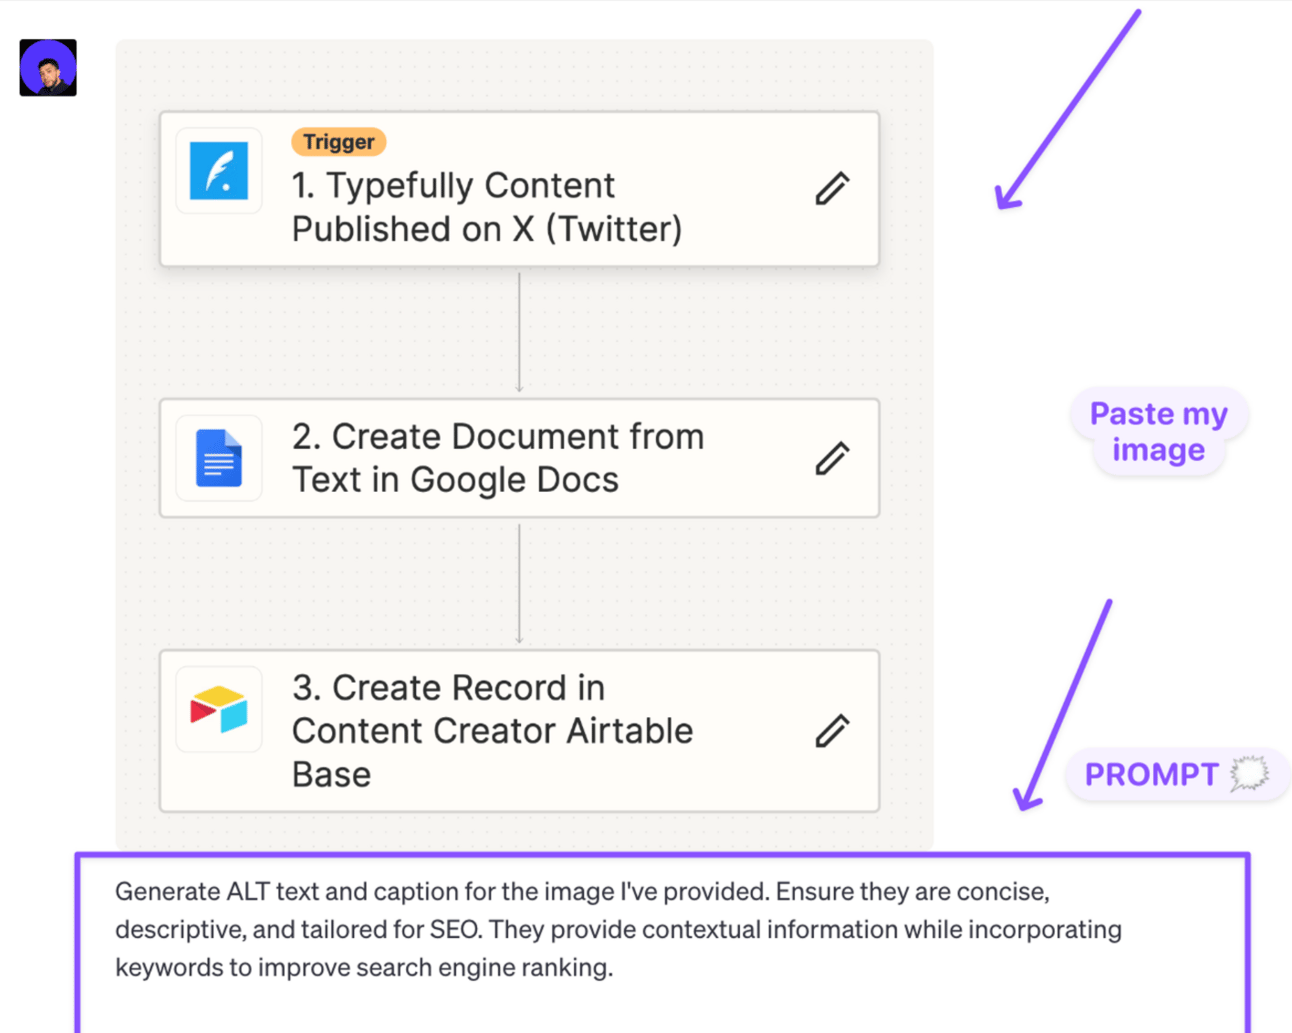 Zapier Workflow illustration showcasing content publishing and management tools.